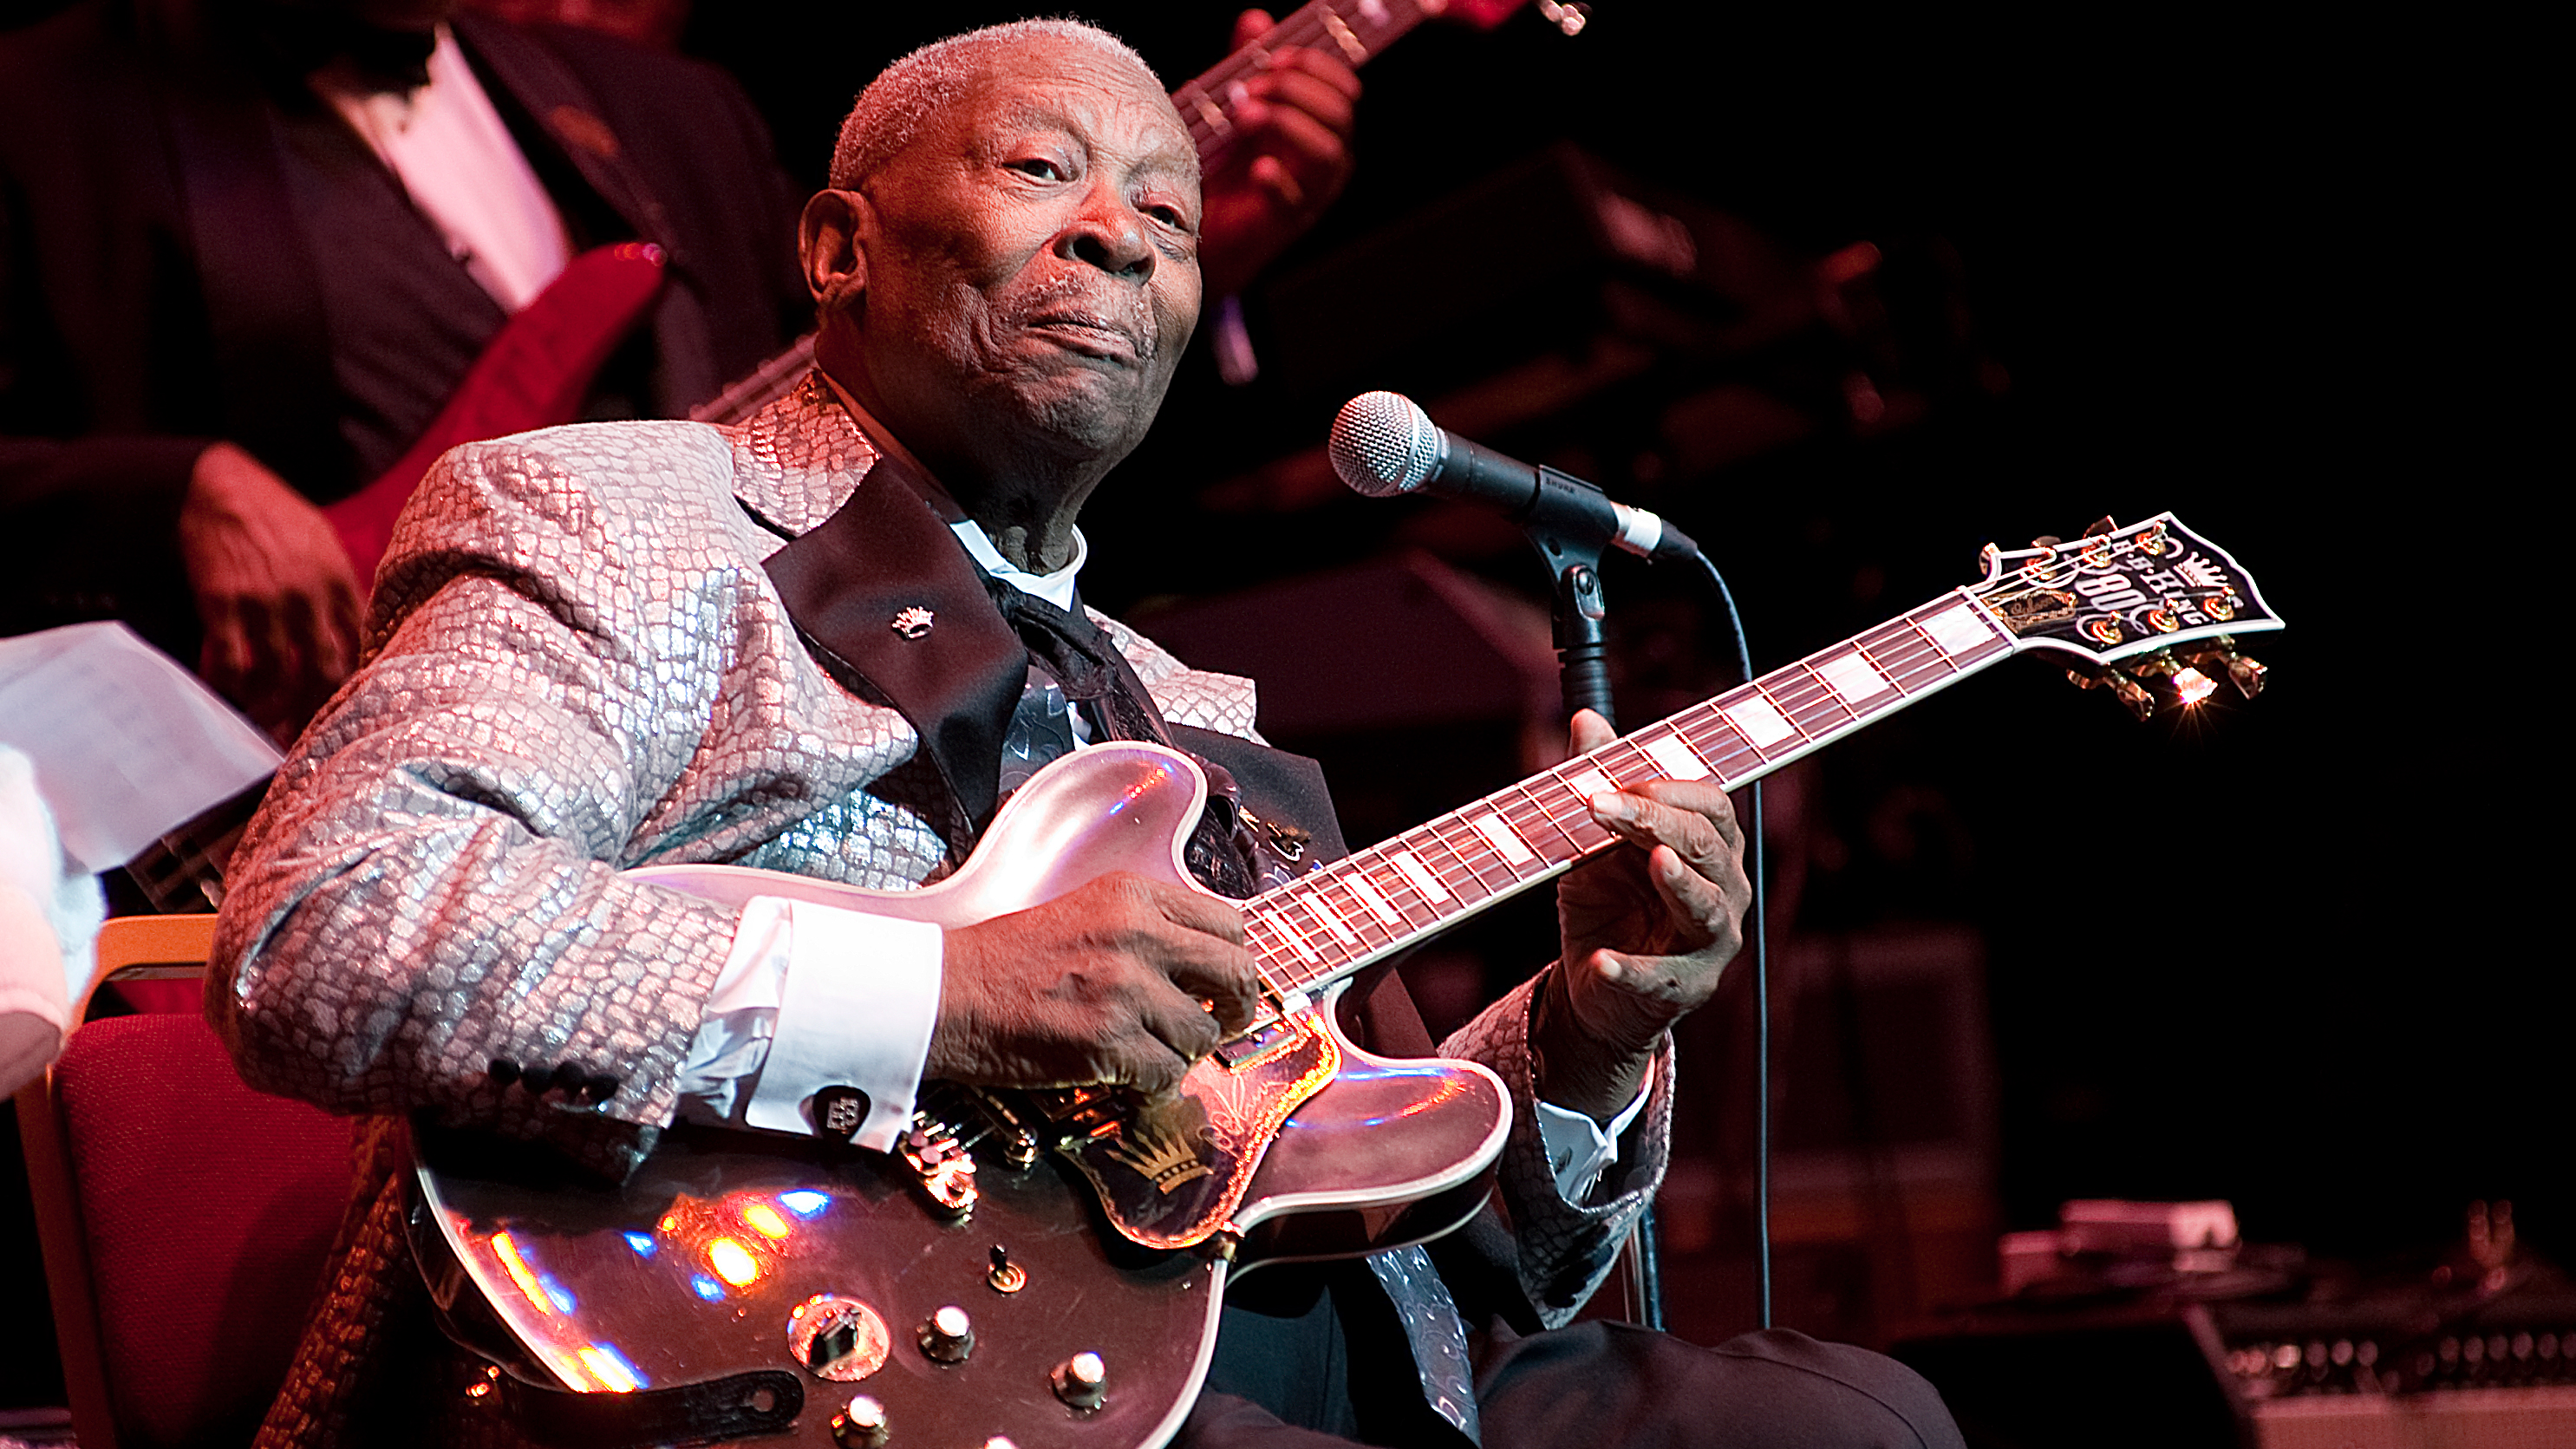 Photo Credit: B.B. King performs on stage at the Royal Albert Hall. Photo: Kevin Nixon